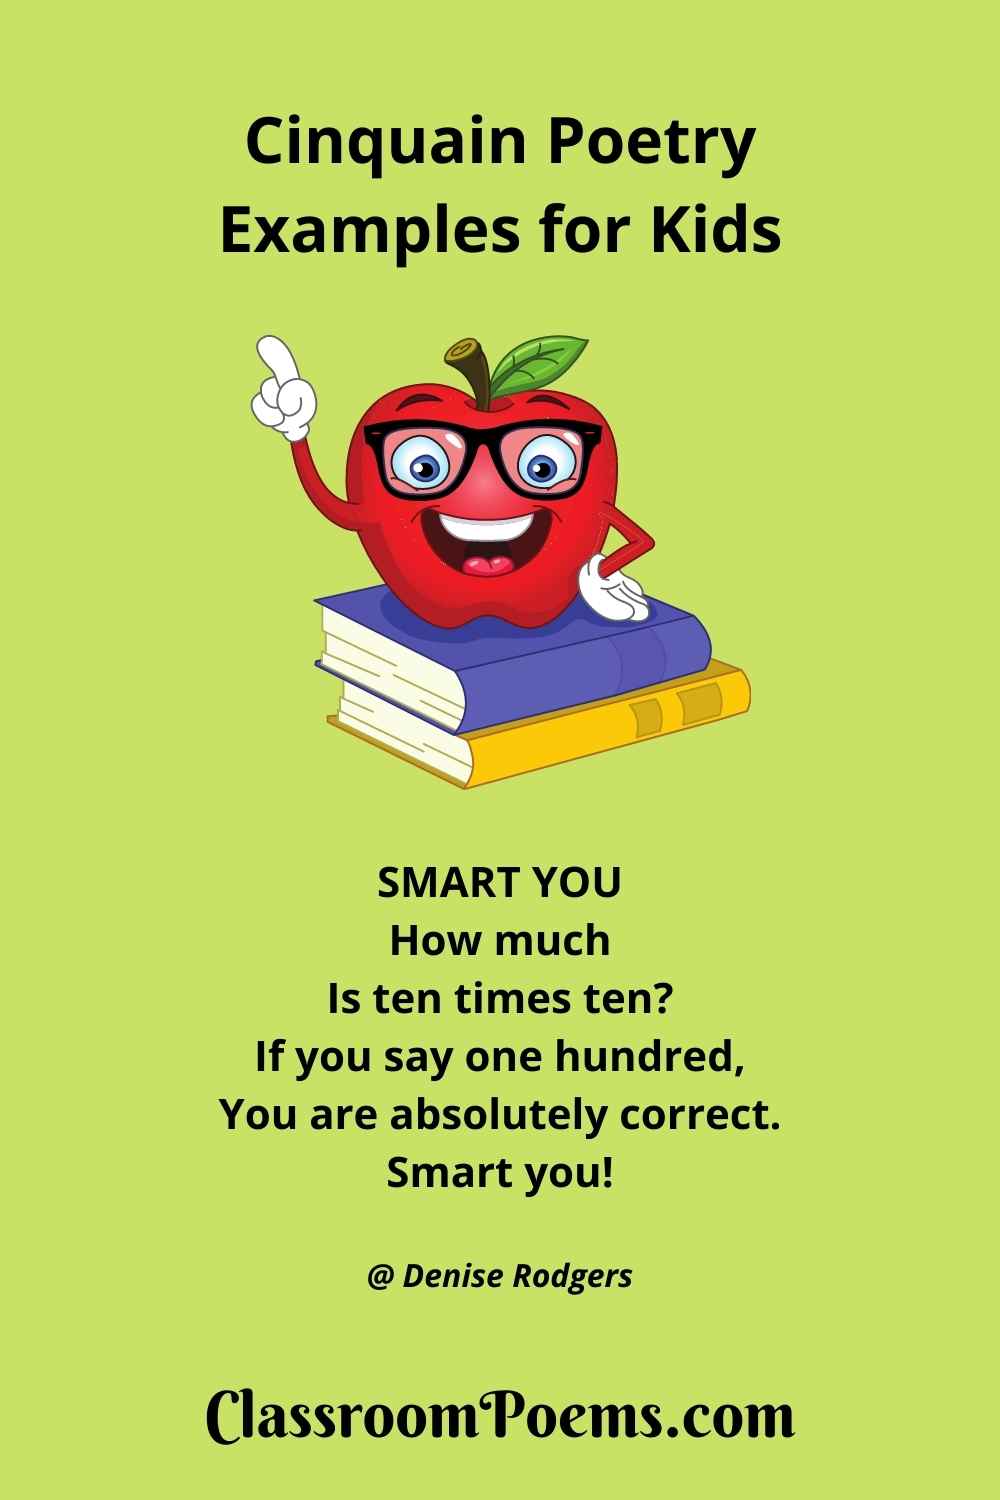 SMART YOU Cinquain Poem by the Poetry Lady Denise Rodgers on ClassroomPoems.com.